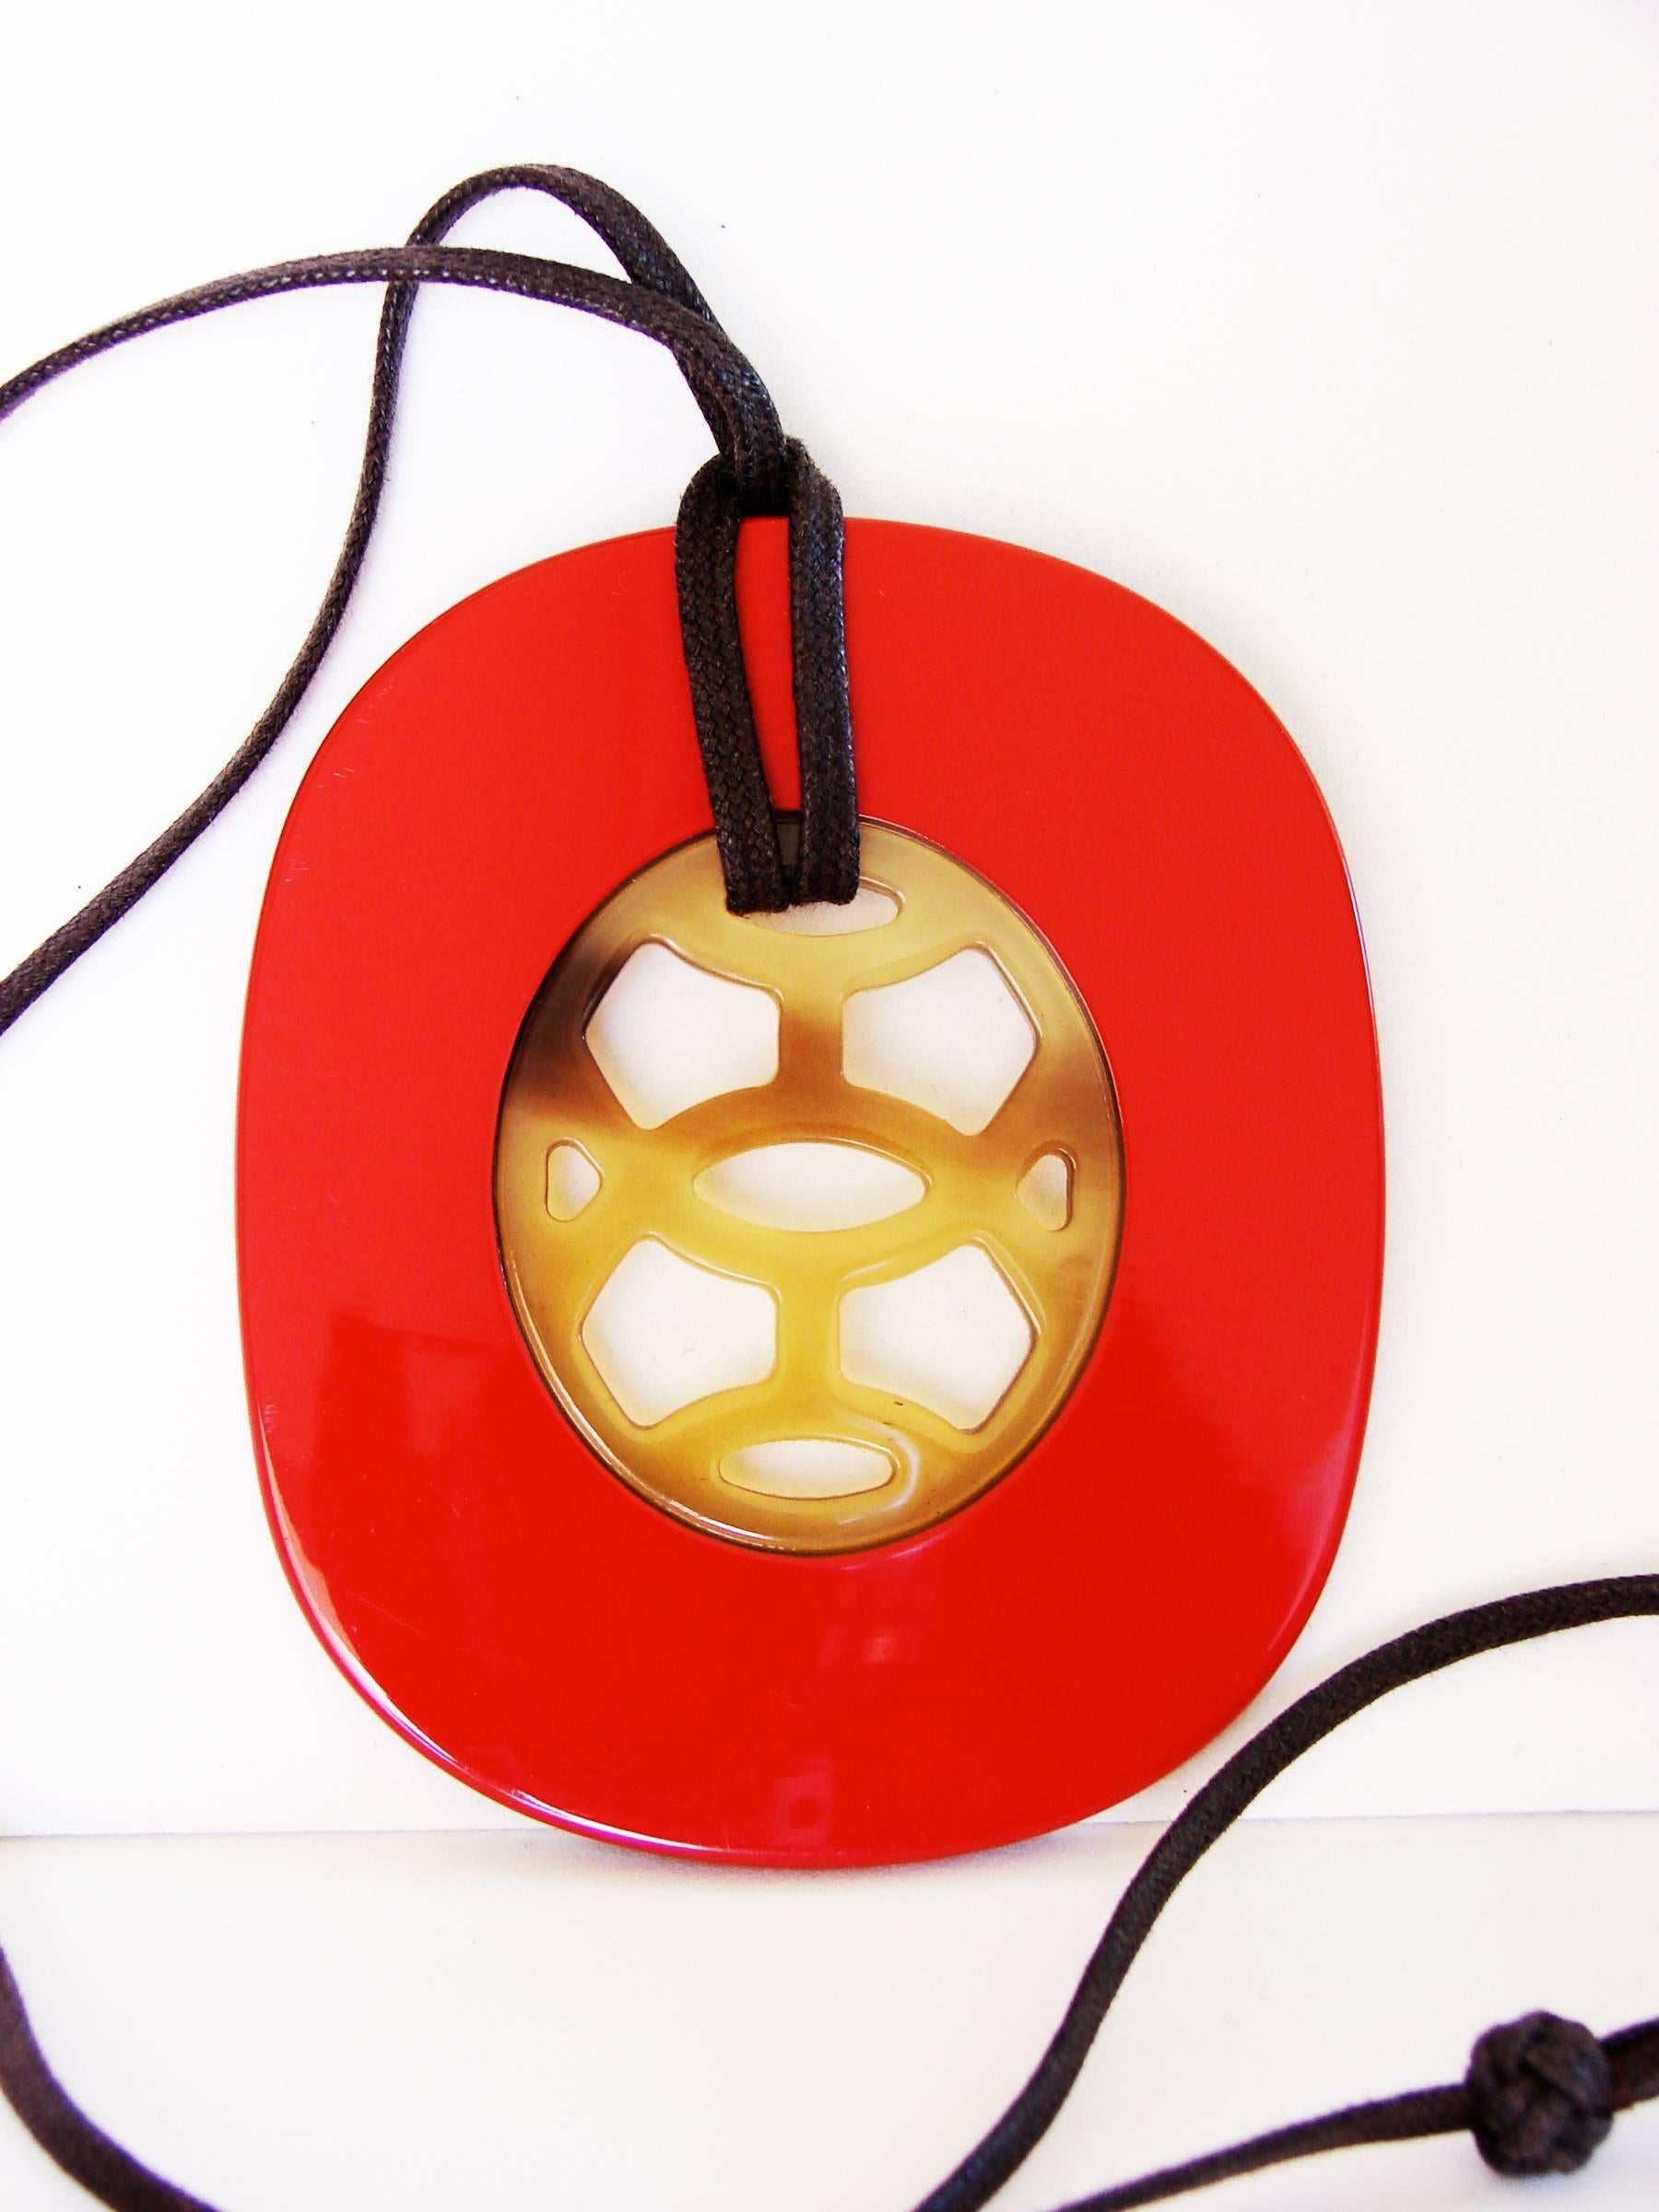 Incredibly stunning pendant with adjustable necklace from Hermes Paris.  Made from Buffalo Horn and Carmine red lacquer, it comes in its original box with felt cover and paperwork.  In excellent condition with very minor scratching, hard to see